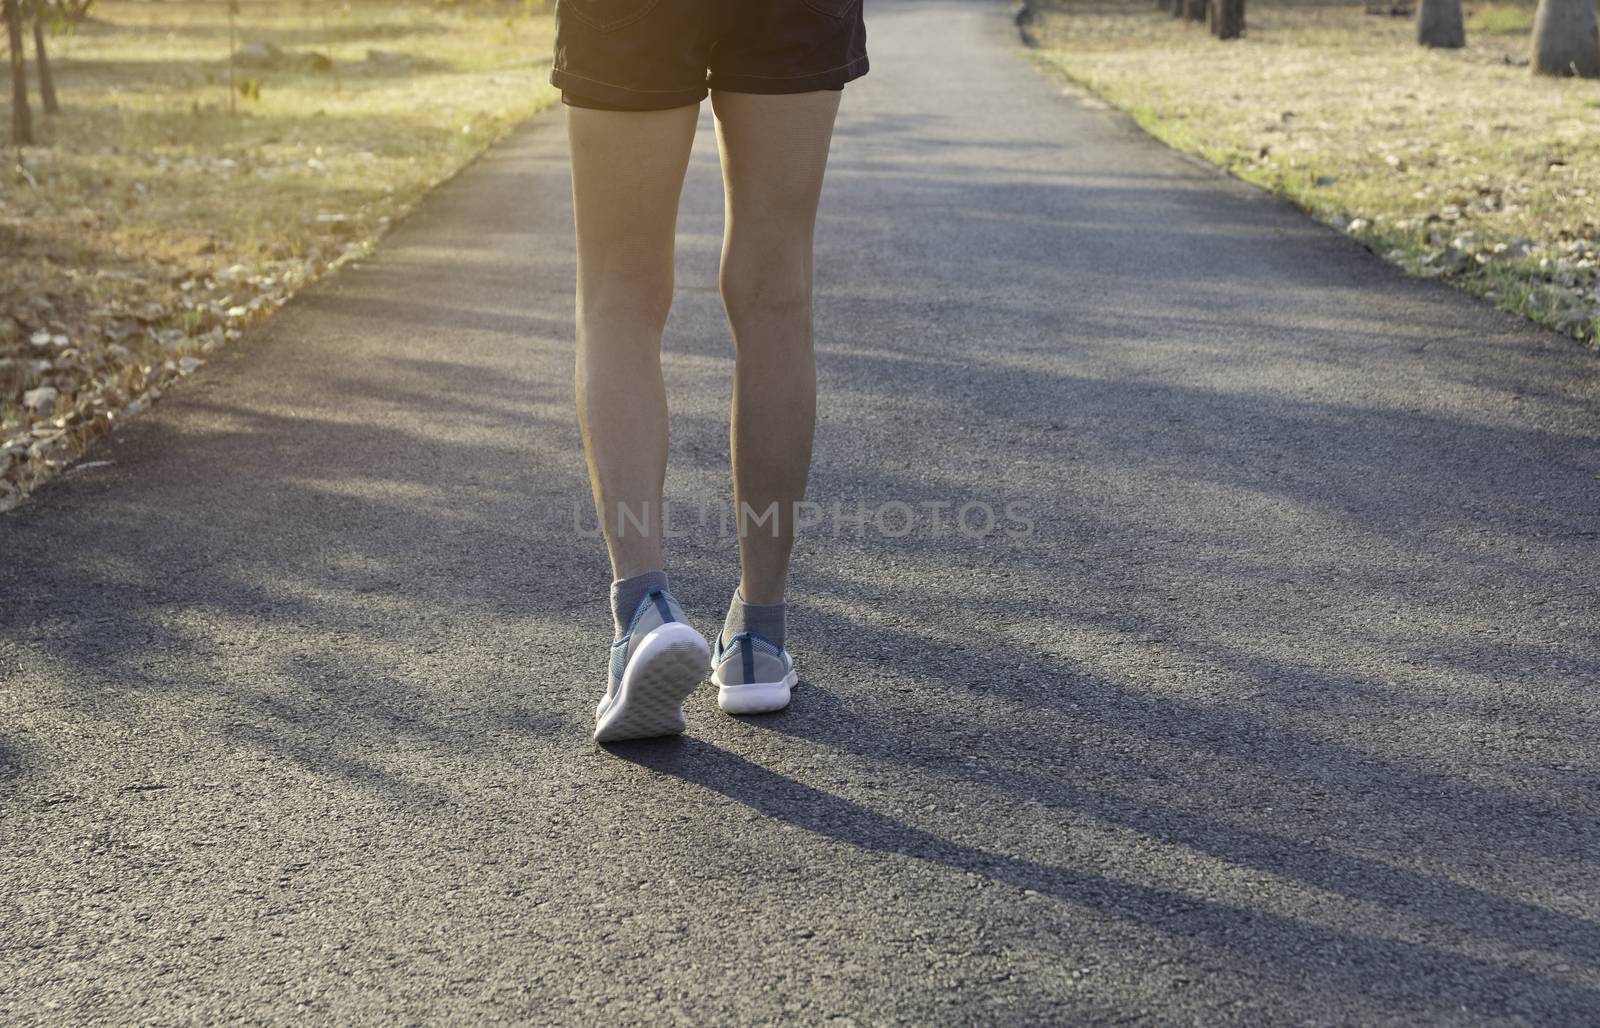 A woman running at the morning for jogging, exercising and healthy lifestyle concept.